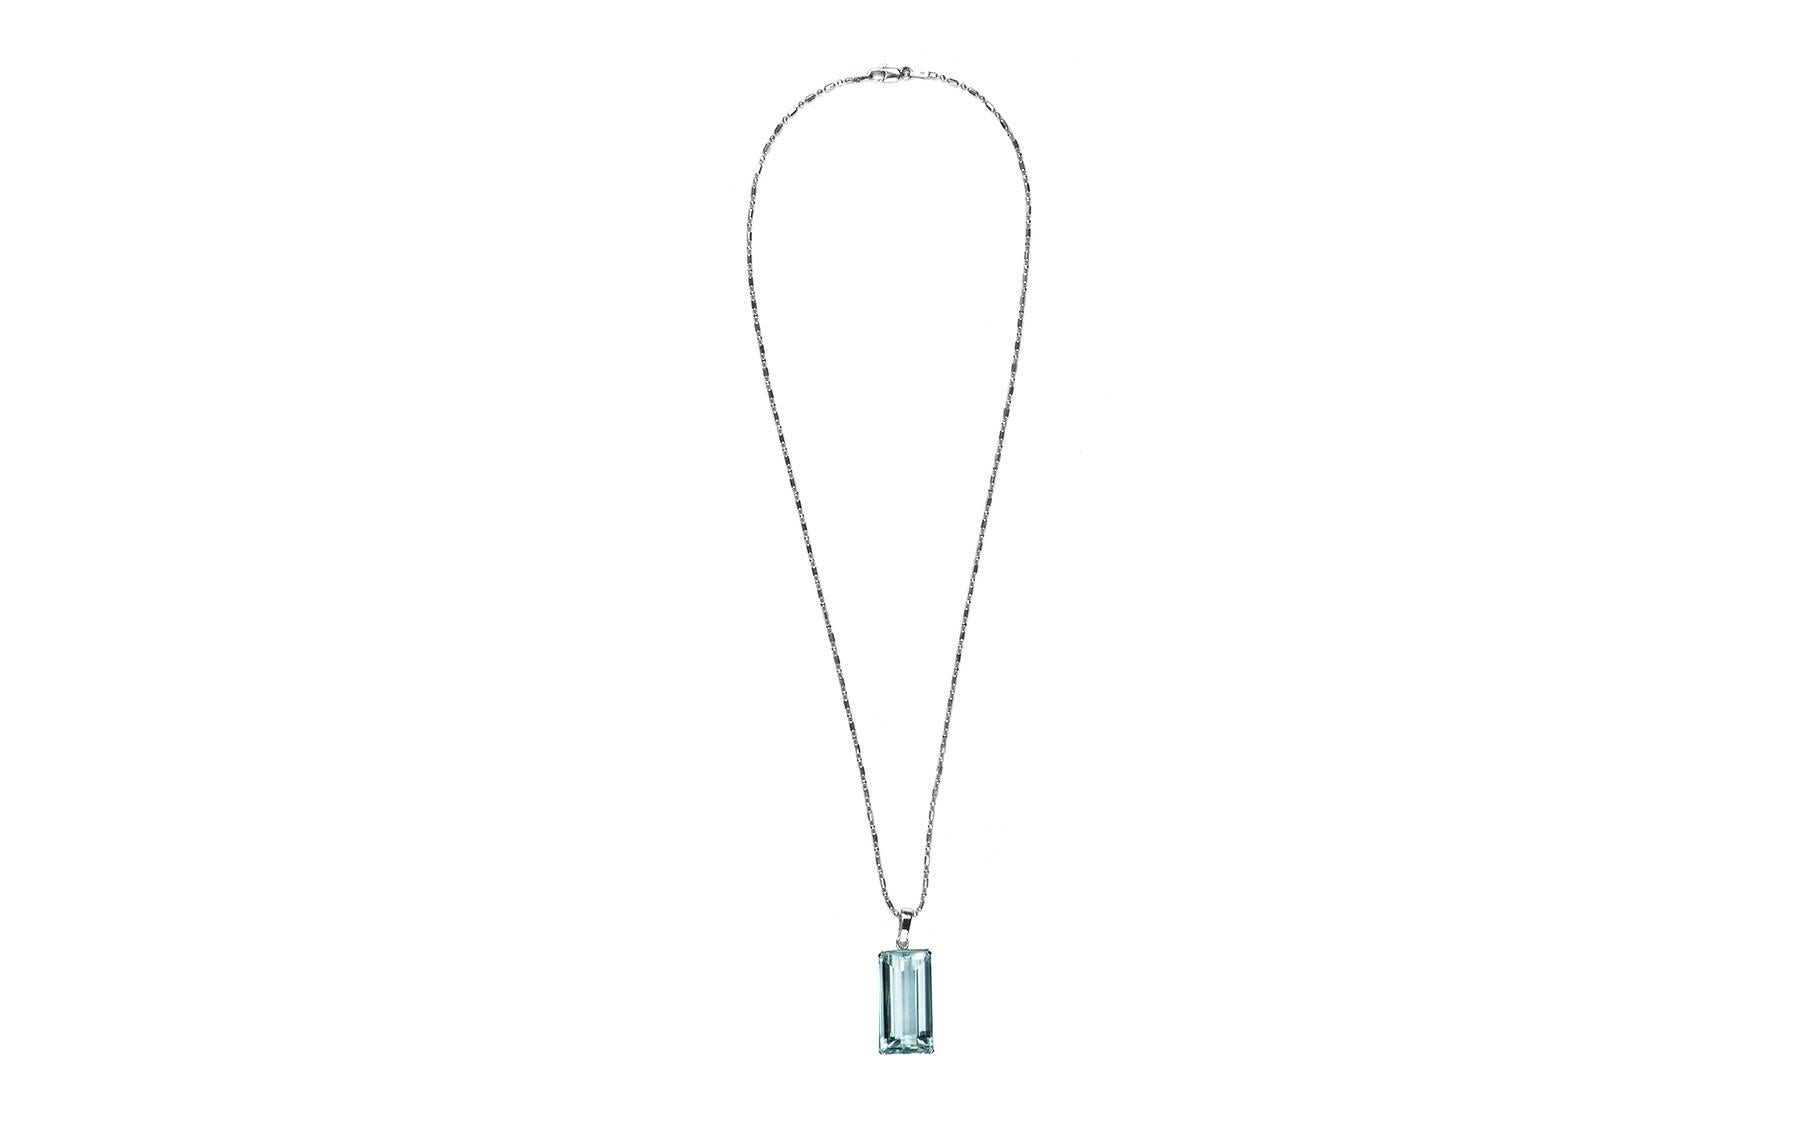 20.58ct emerald cut aquamarine 14k white gold pendant necklace.  The aquamarine is set in a four prong basket, suspended from a bale on a beaded chain.

Length:  18.00 inches
Hallmark:  Italy 14K